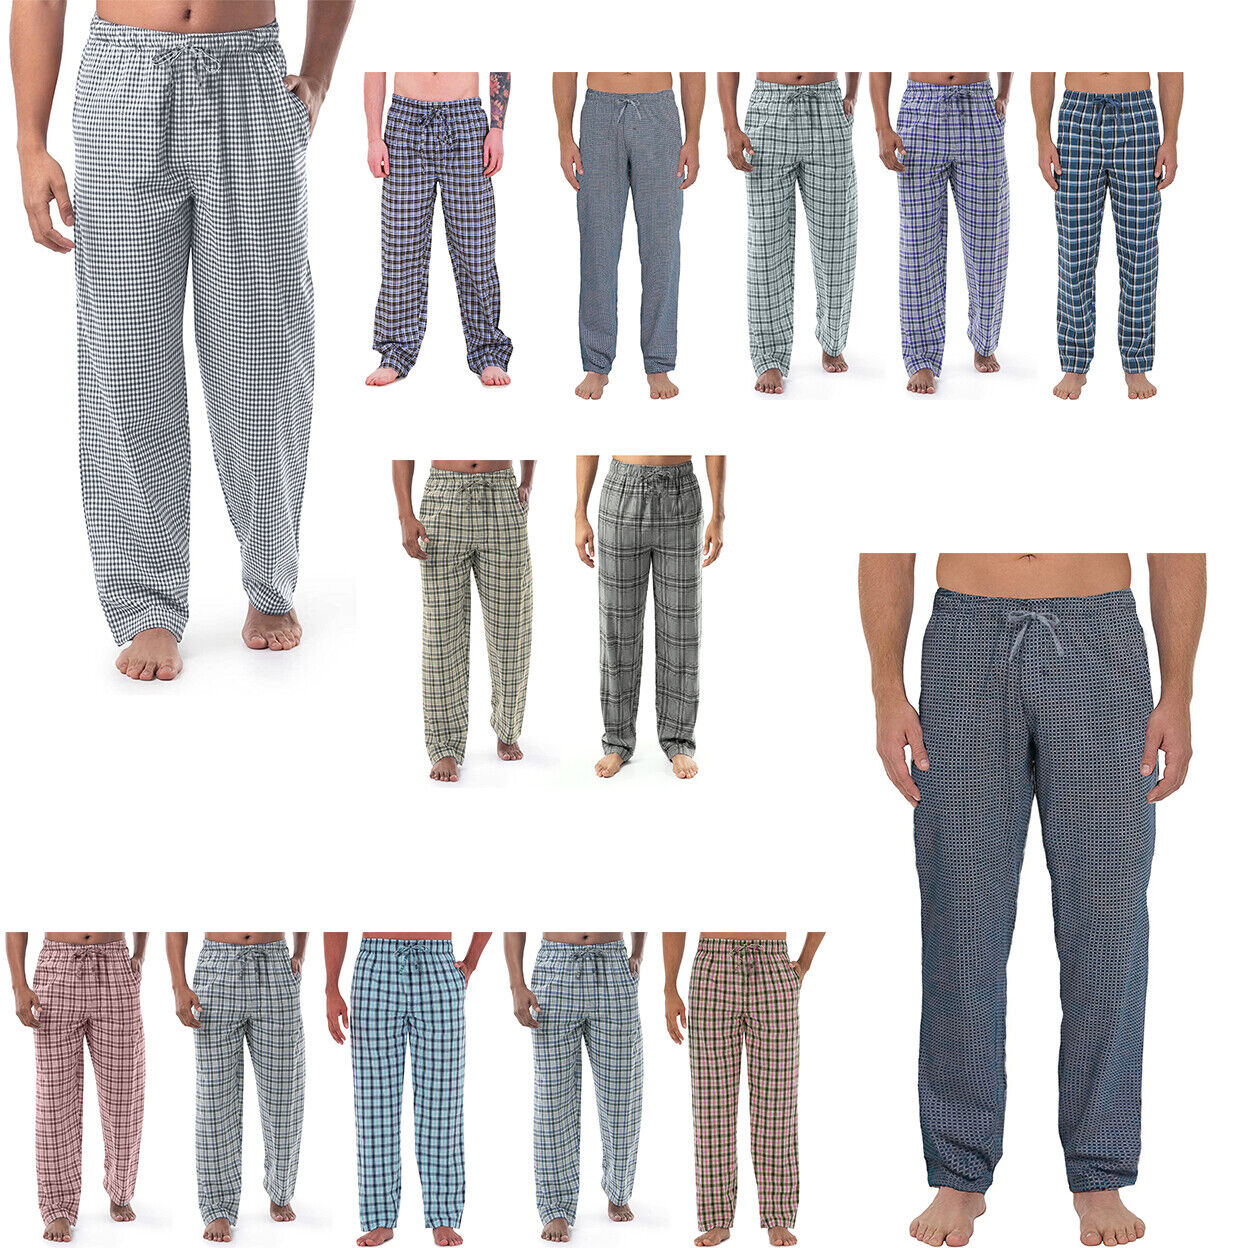 2-Pack: Men's Ultra-Soft Solid & Plaid Cotton Jersey Knit Comfy Sleep Lounge Pajama Pants - Plaid, Small